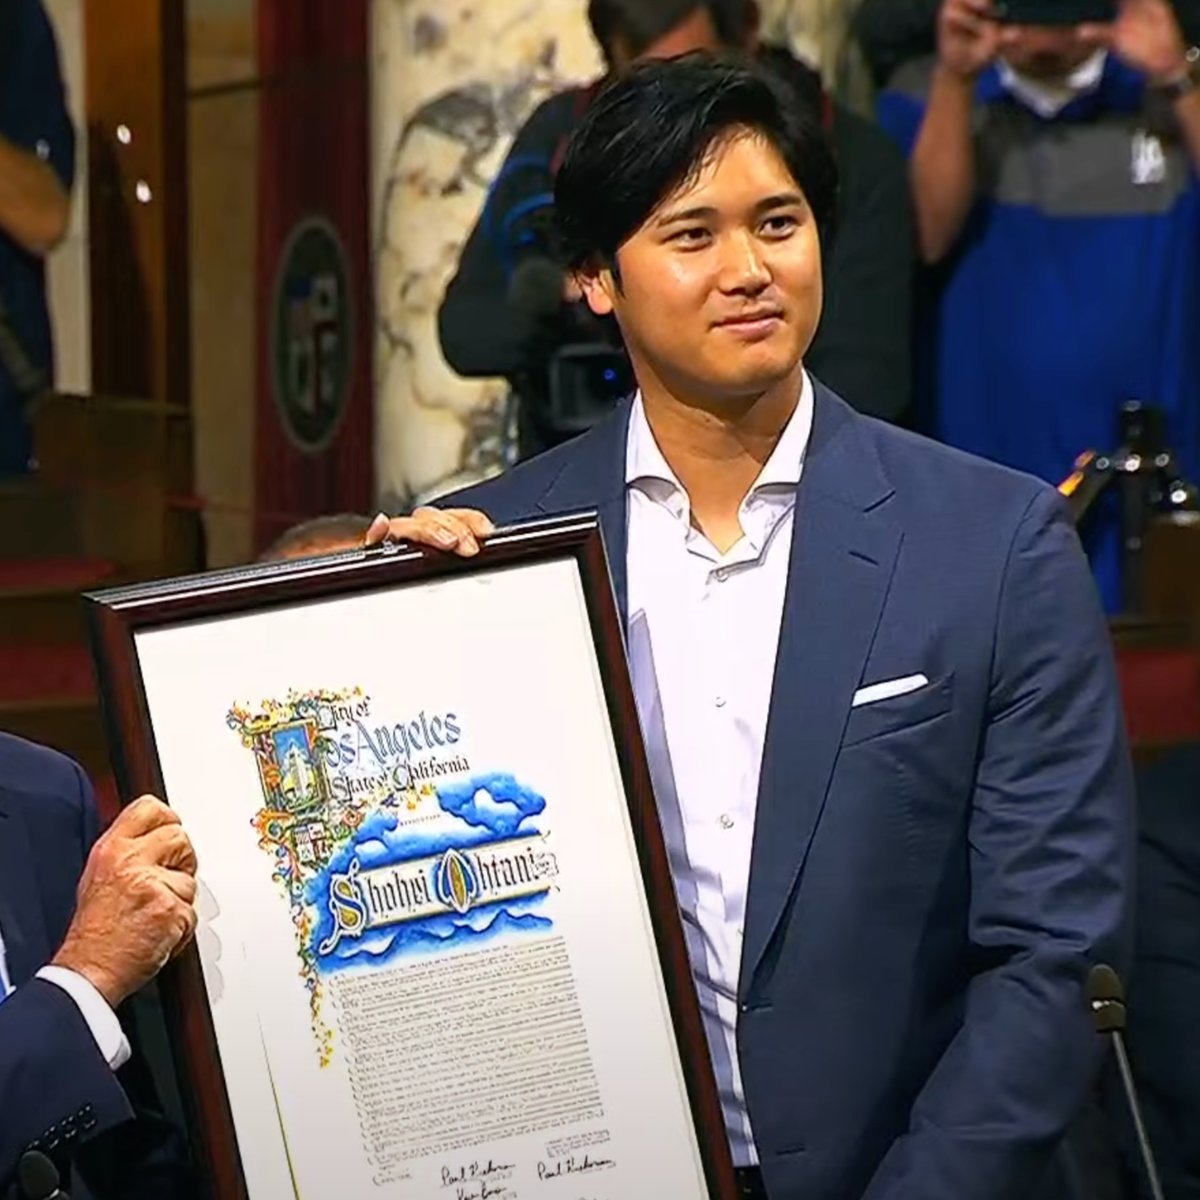 The City of Los Angeles has officially declared May 17th as Shohei Ohtani Day ⚾️